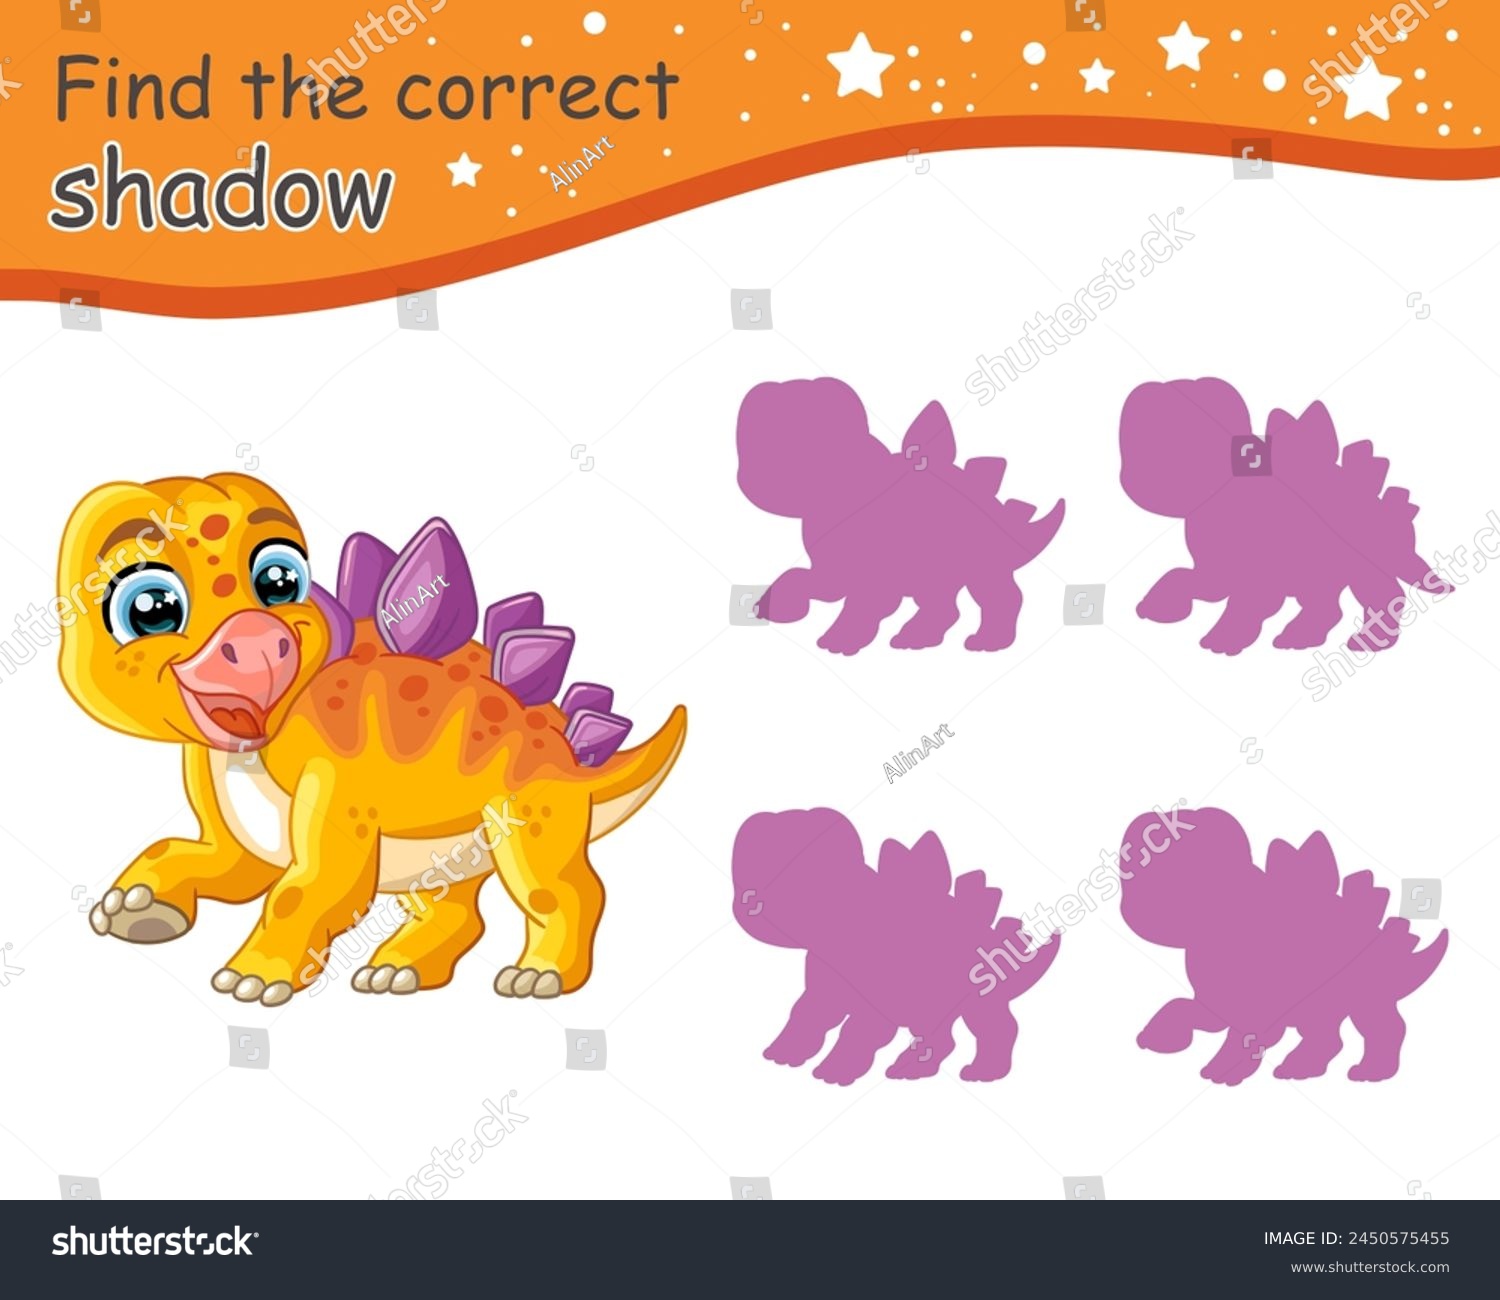 SVG of Find correct shadow. Cute cartoon Stegosaurus dinosaur. Educational matching game for children with cartoon character. Activity, logic game, learning card with task for kids, vector illustration svg